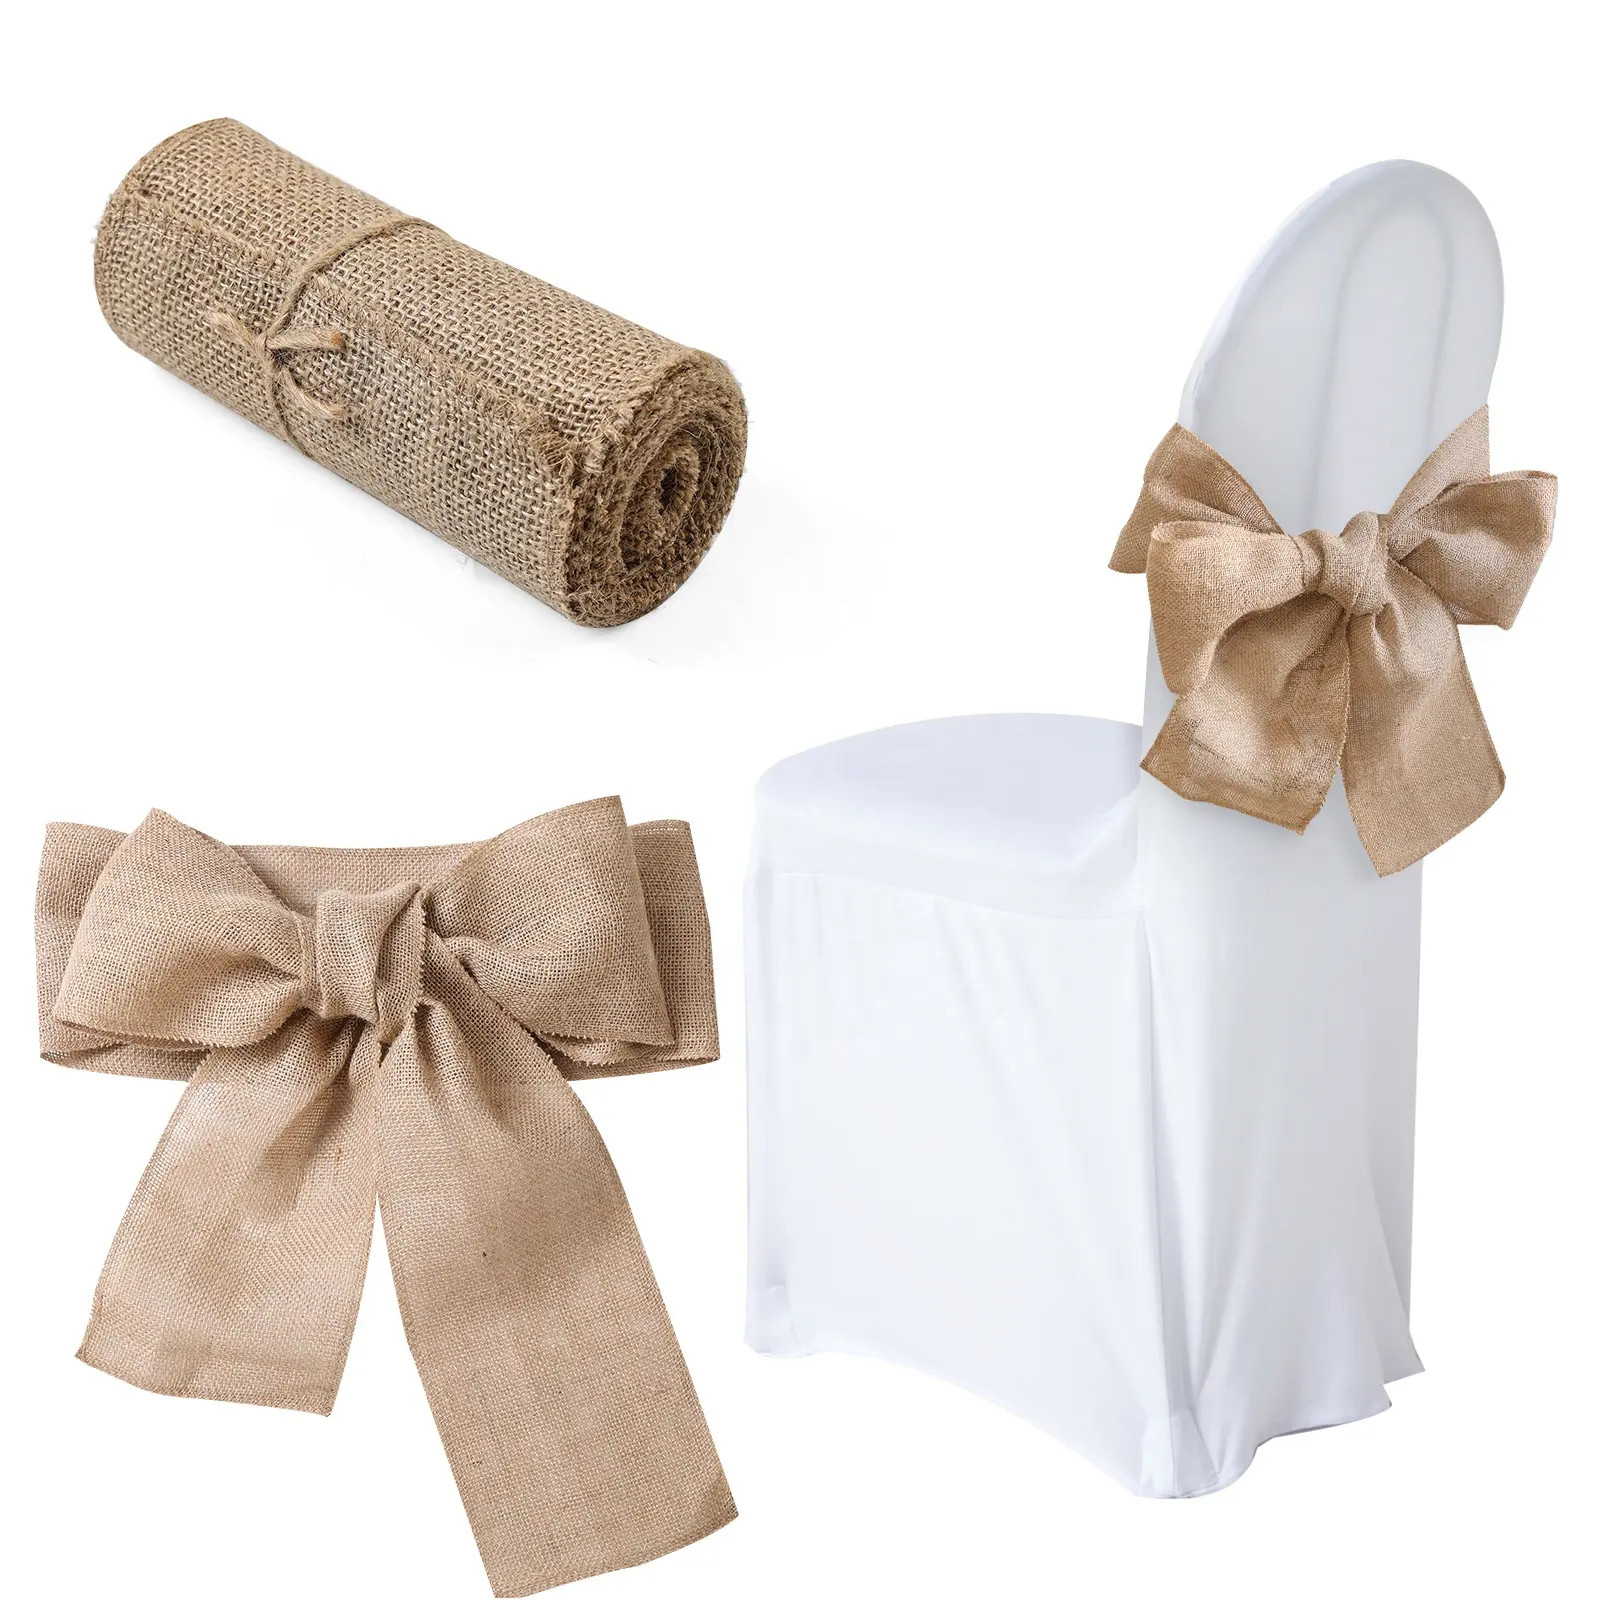 Natural Burlap Chair Bow Sash Jute Country Vintage Hessian Chair Ties For Wedding